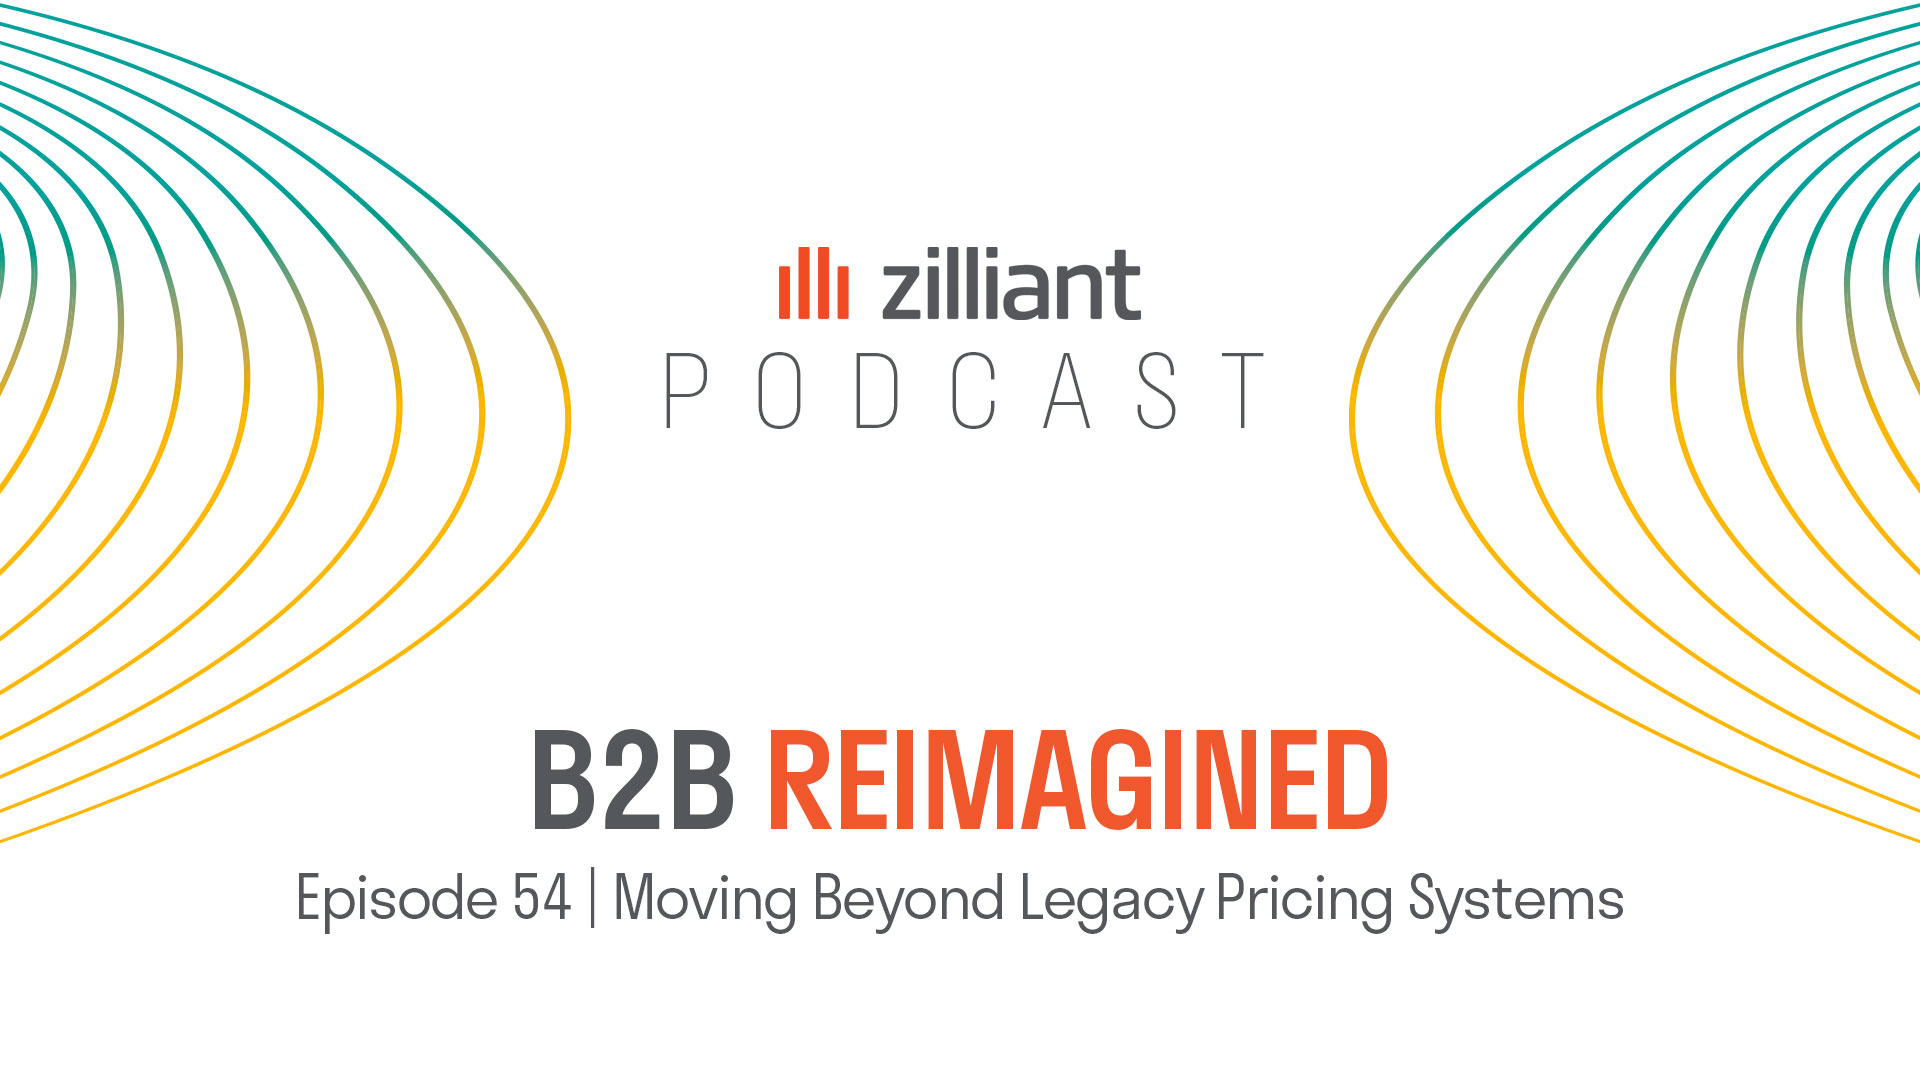 Moving Beyond Legacy Pricing Systems